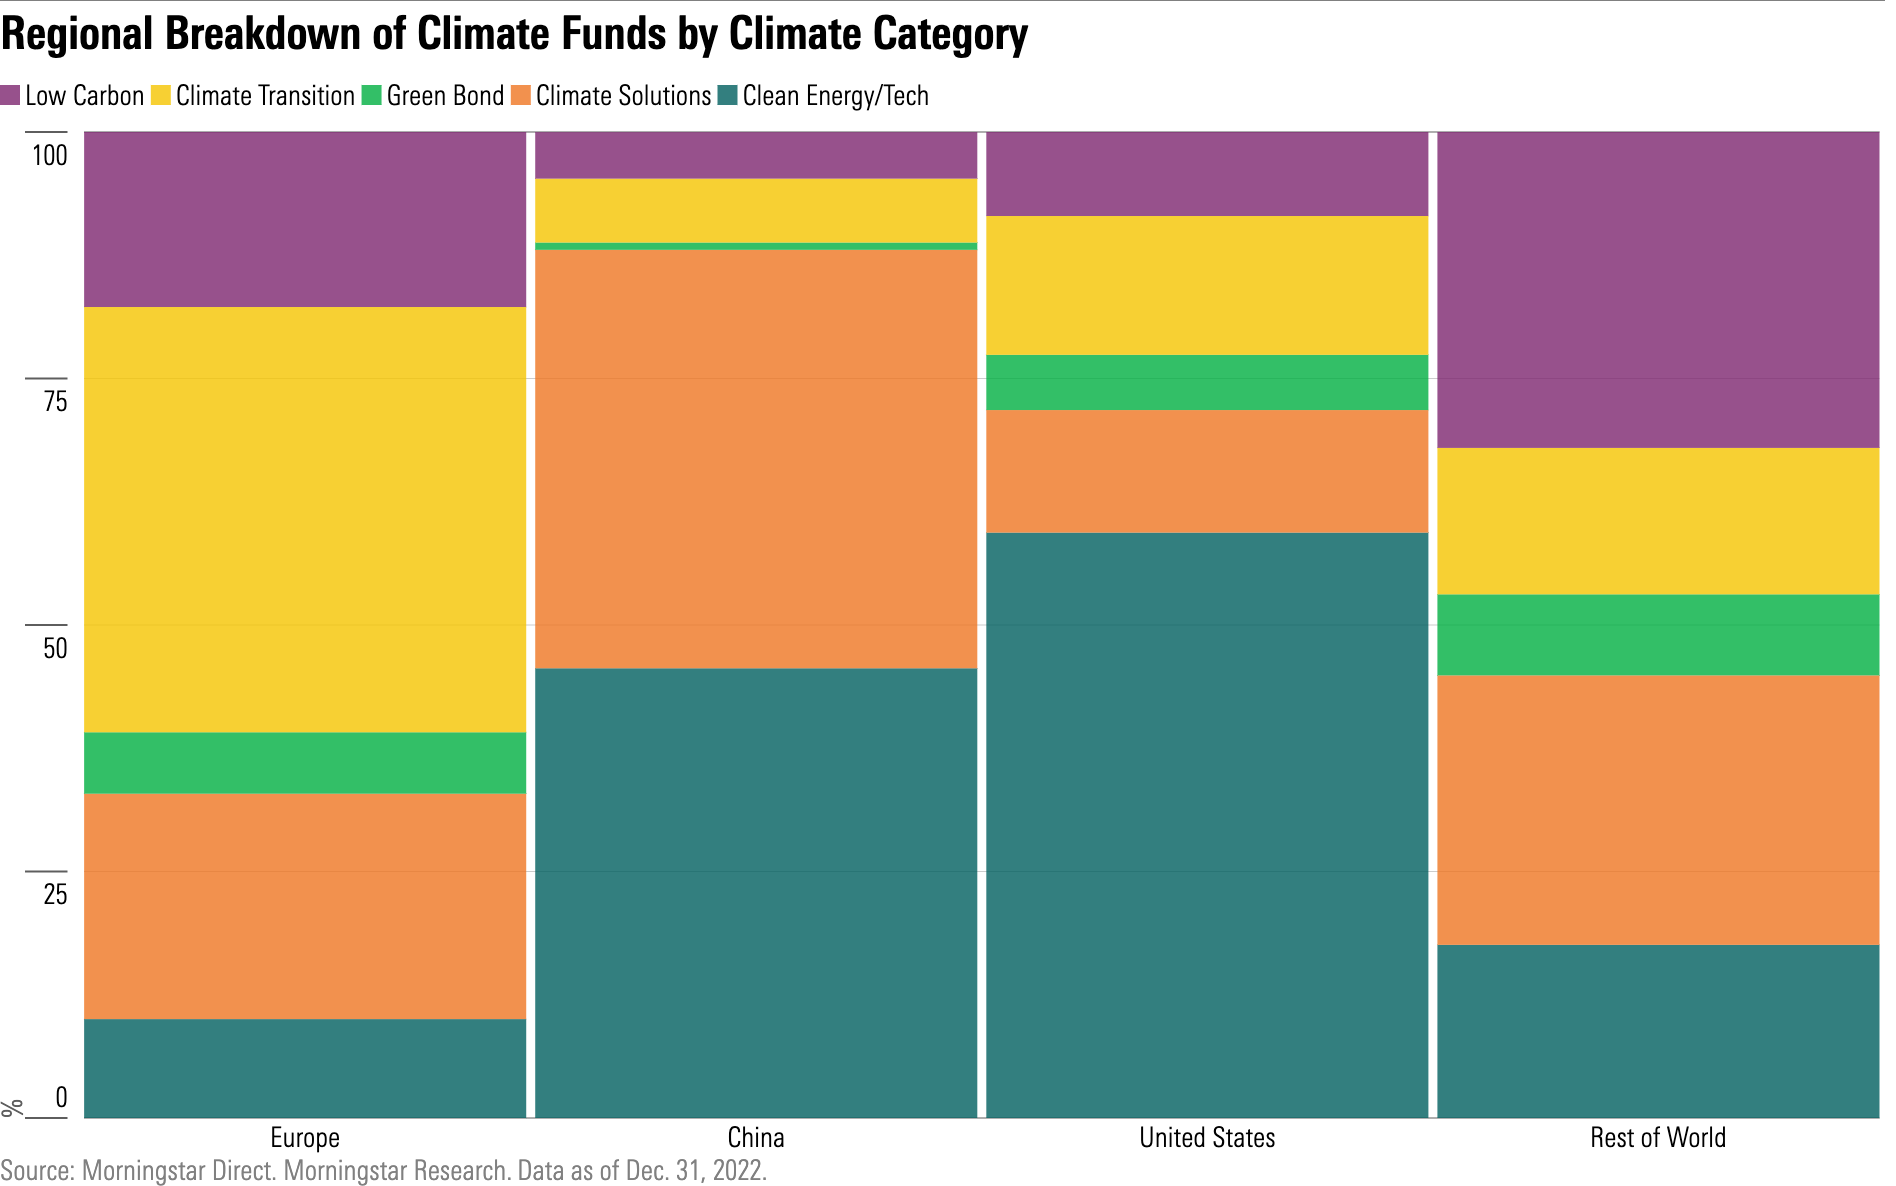 Stacked bar chart showing the number of low carbon, climate transition, green bond, climate solutions, and clean energy/tech funds around the world.